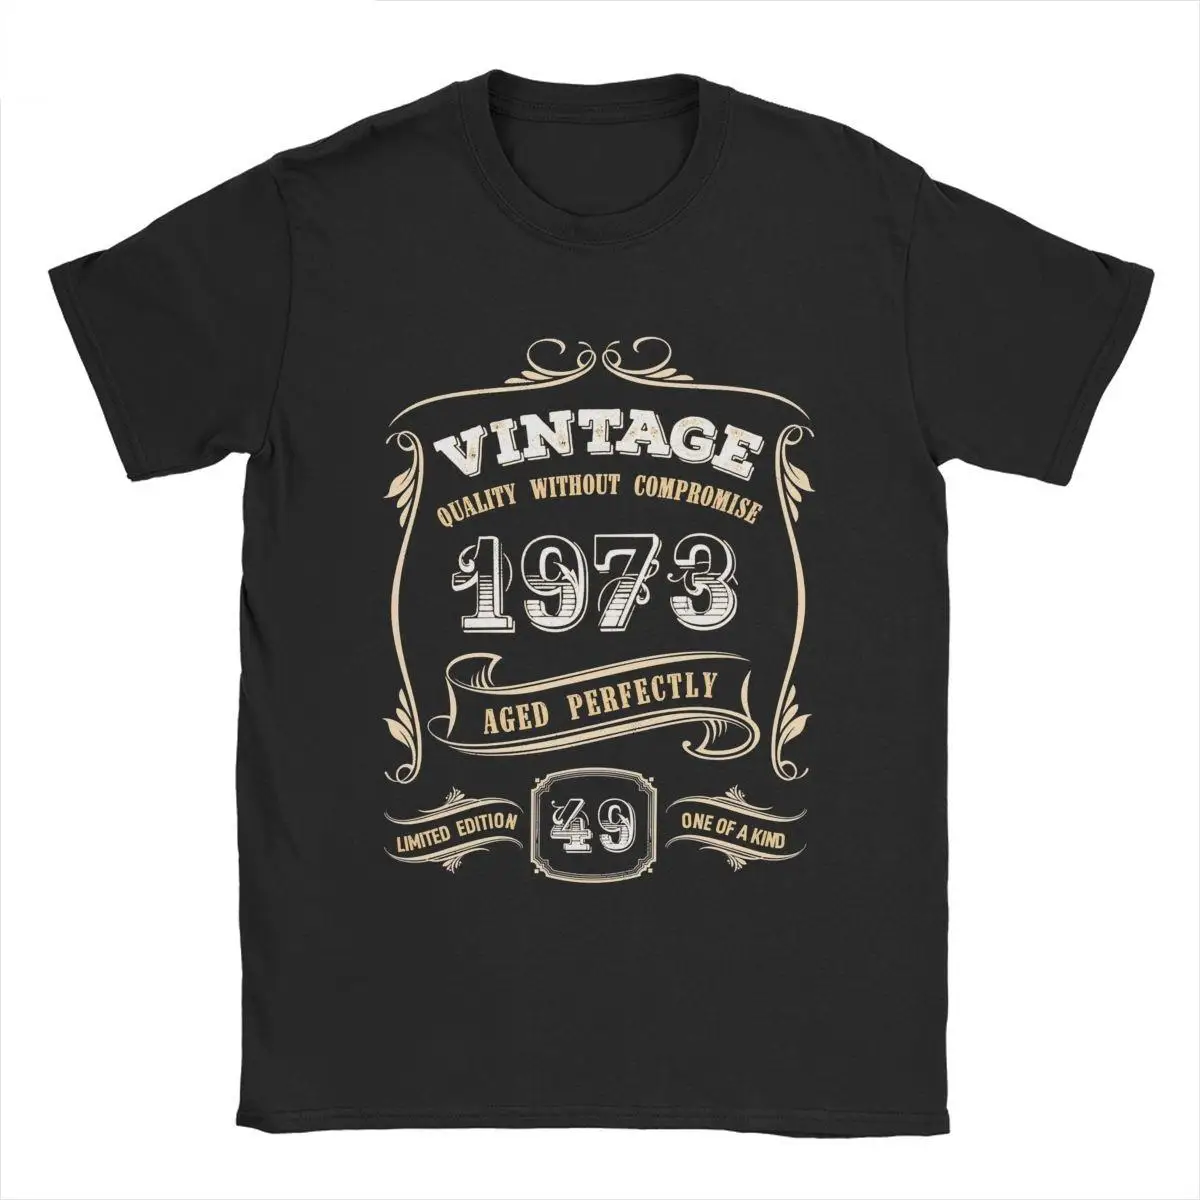 

50th Birthday Gift Vintage 1973 Aged Perfectly Men's T Shirts 50 Years Old Tee Shirt Crew Neck T-Shirt 100% Cotton Printed Tops